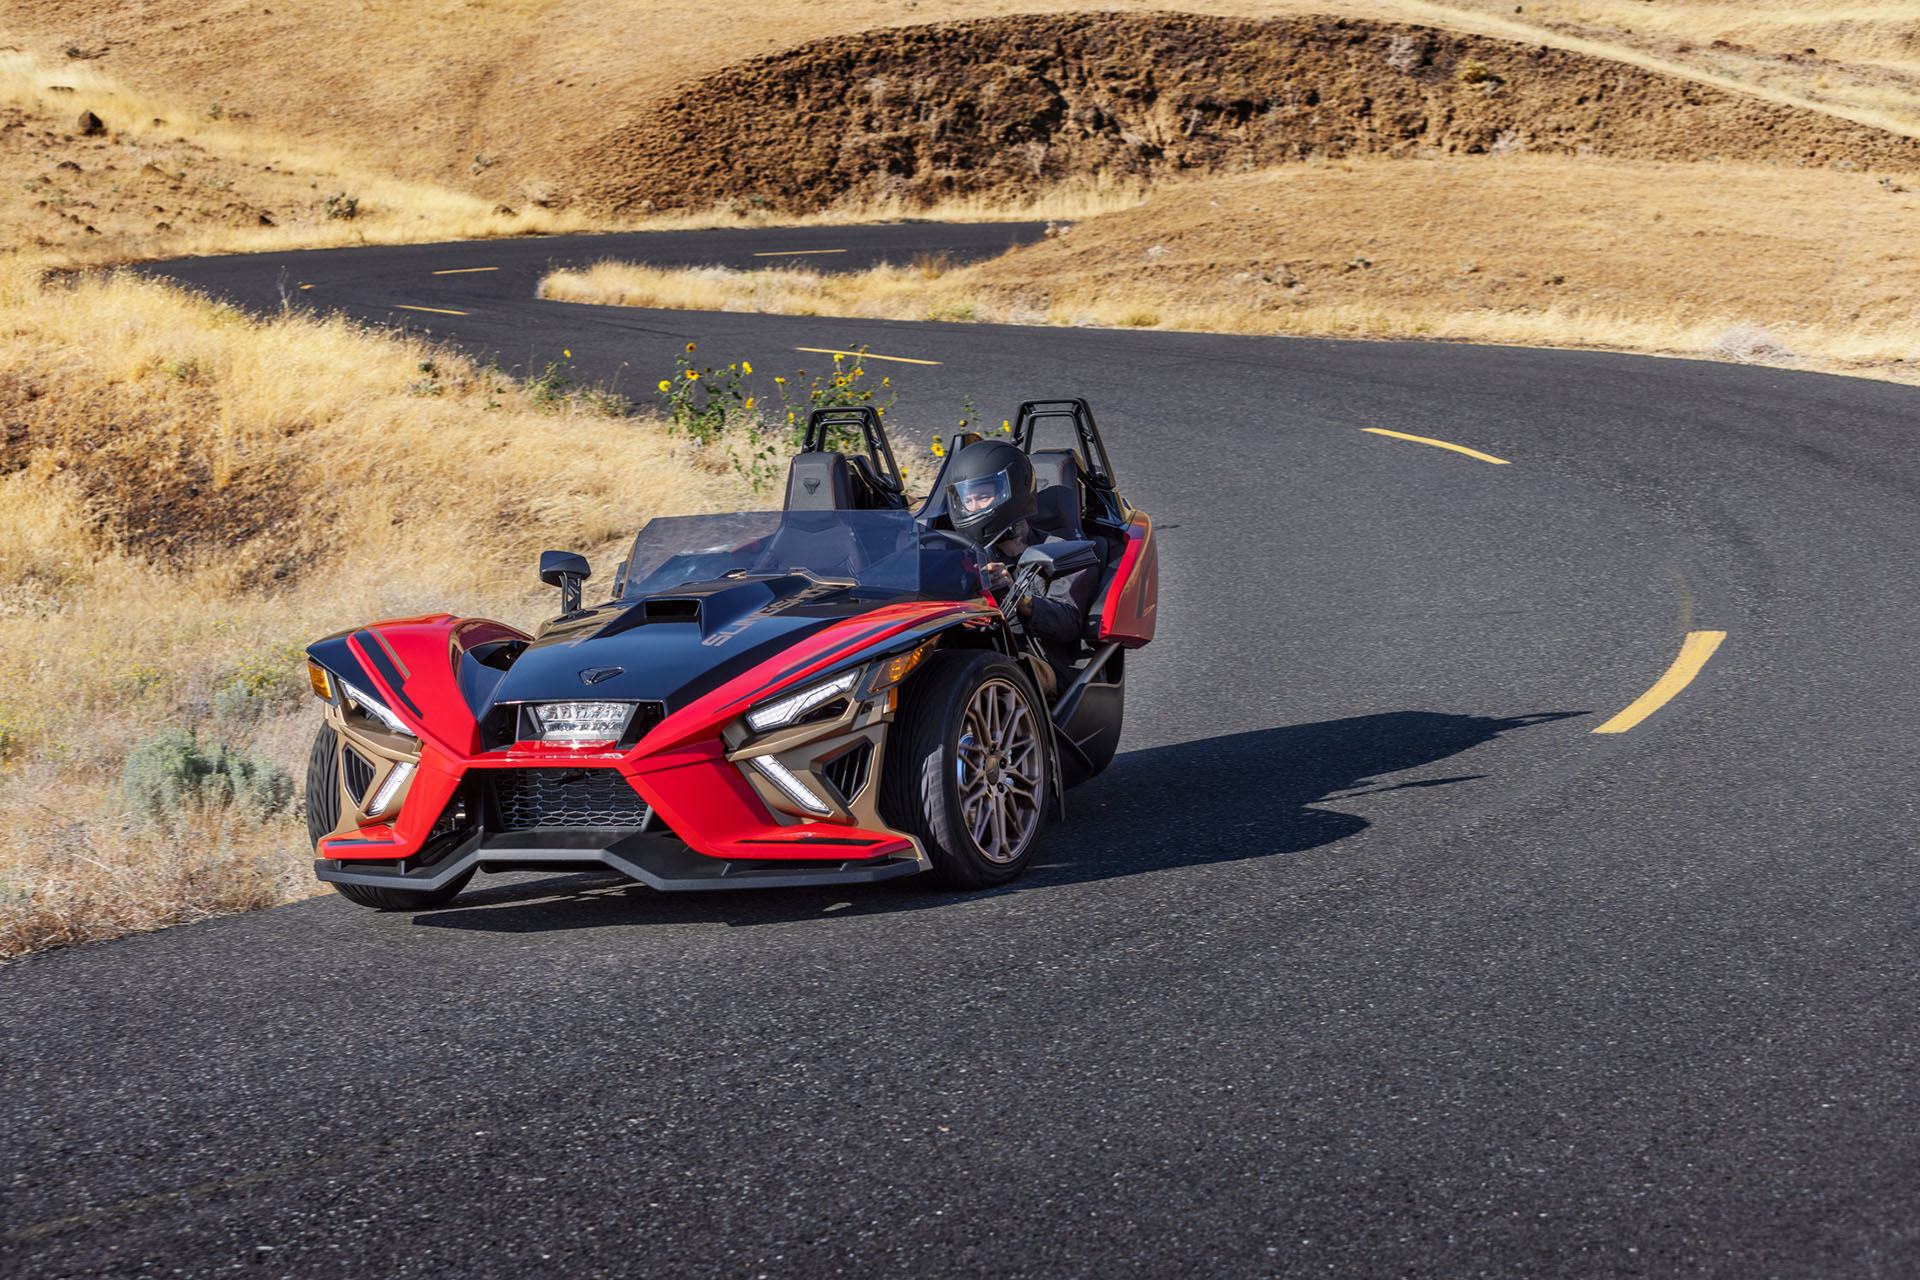 2022 Slingshot Signature Limited Edition AutoDrive in Berkeley Springs, West Virginia - Photo 5